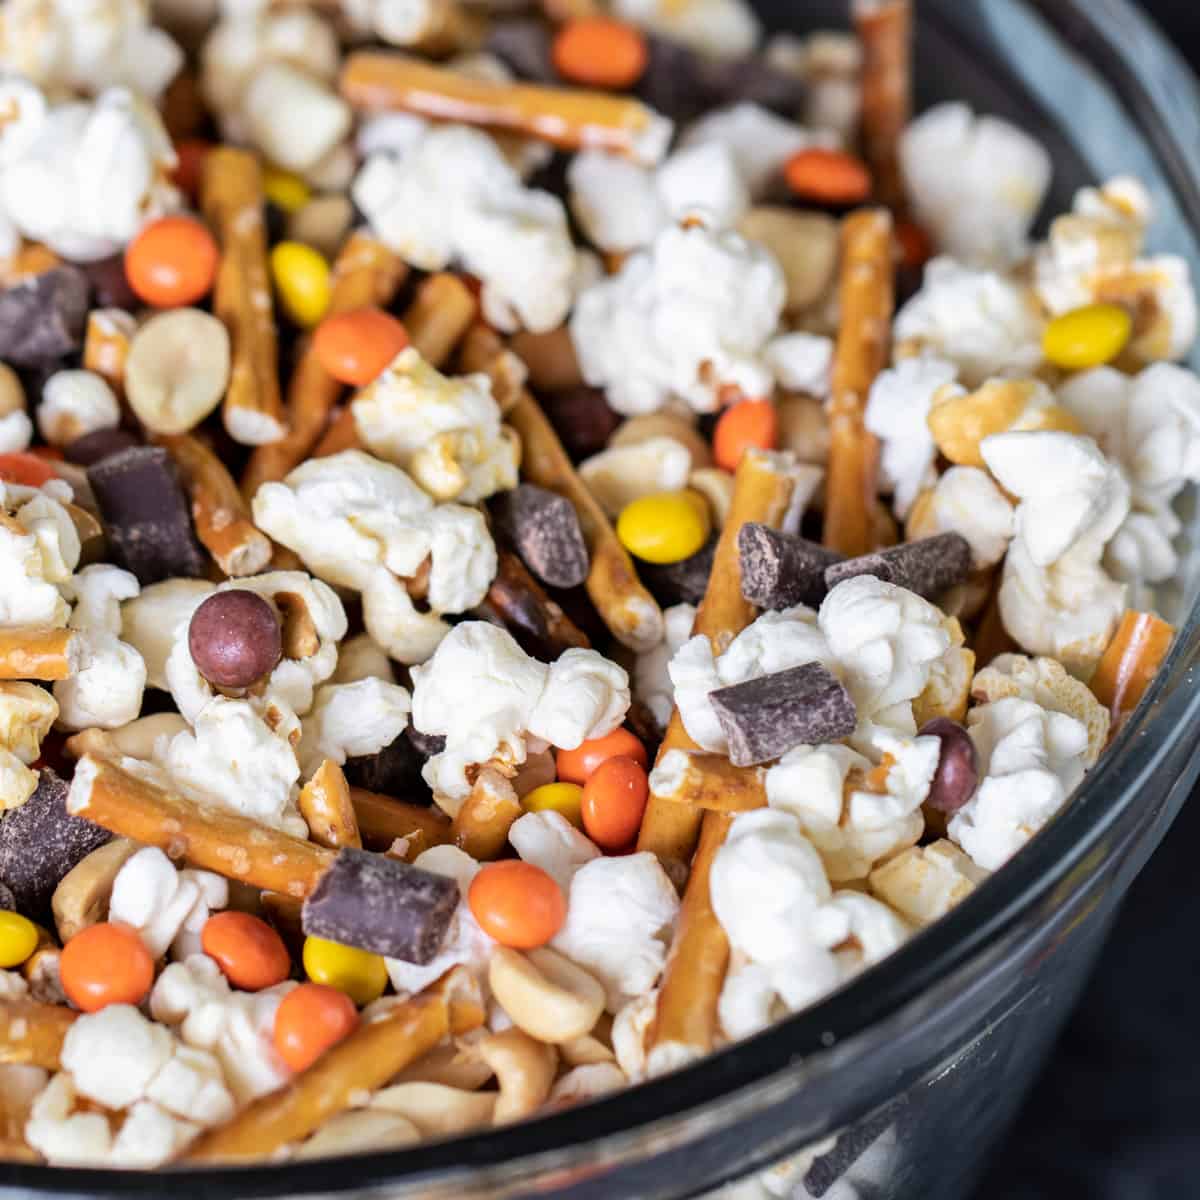 A close up picture of a sweet and salty trail mix.